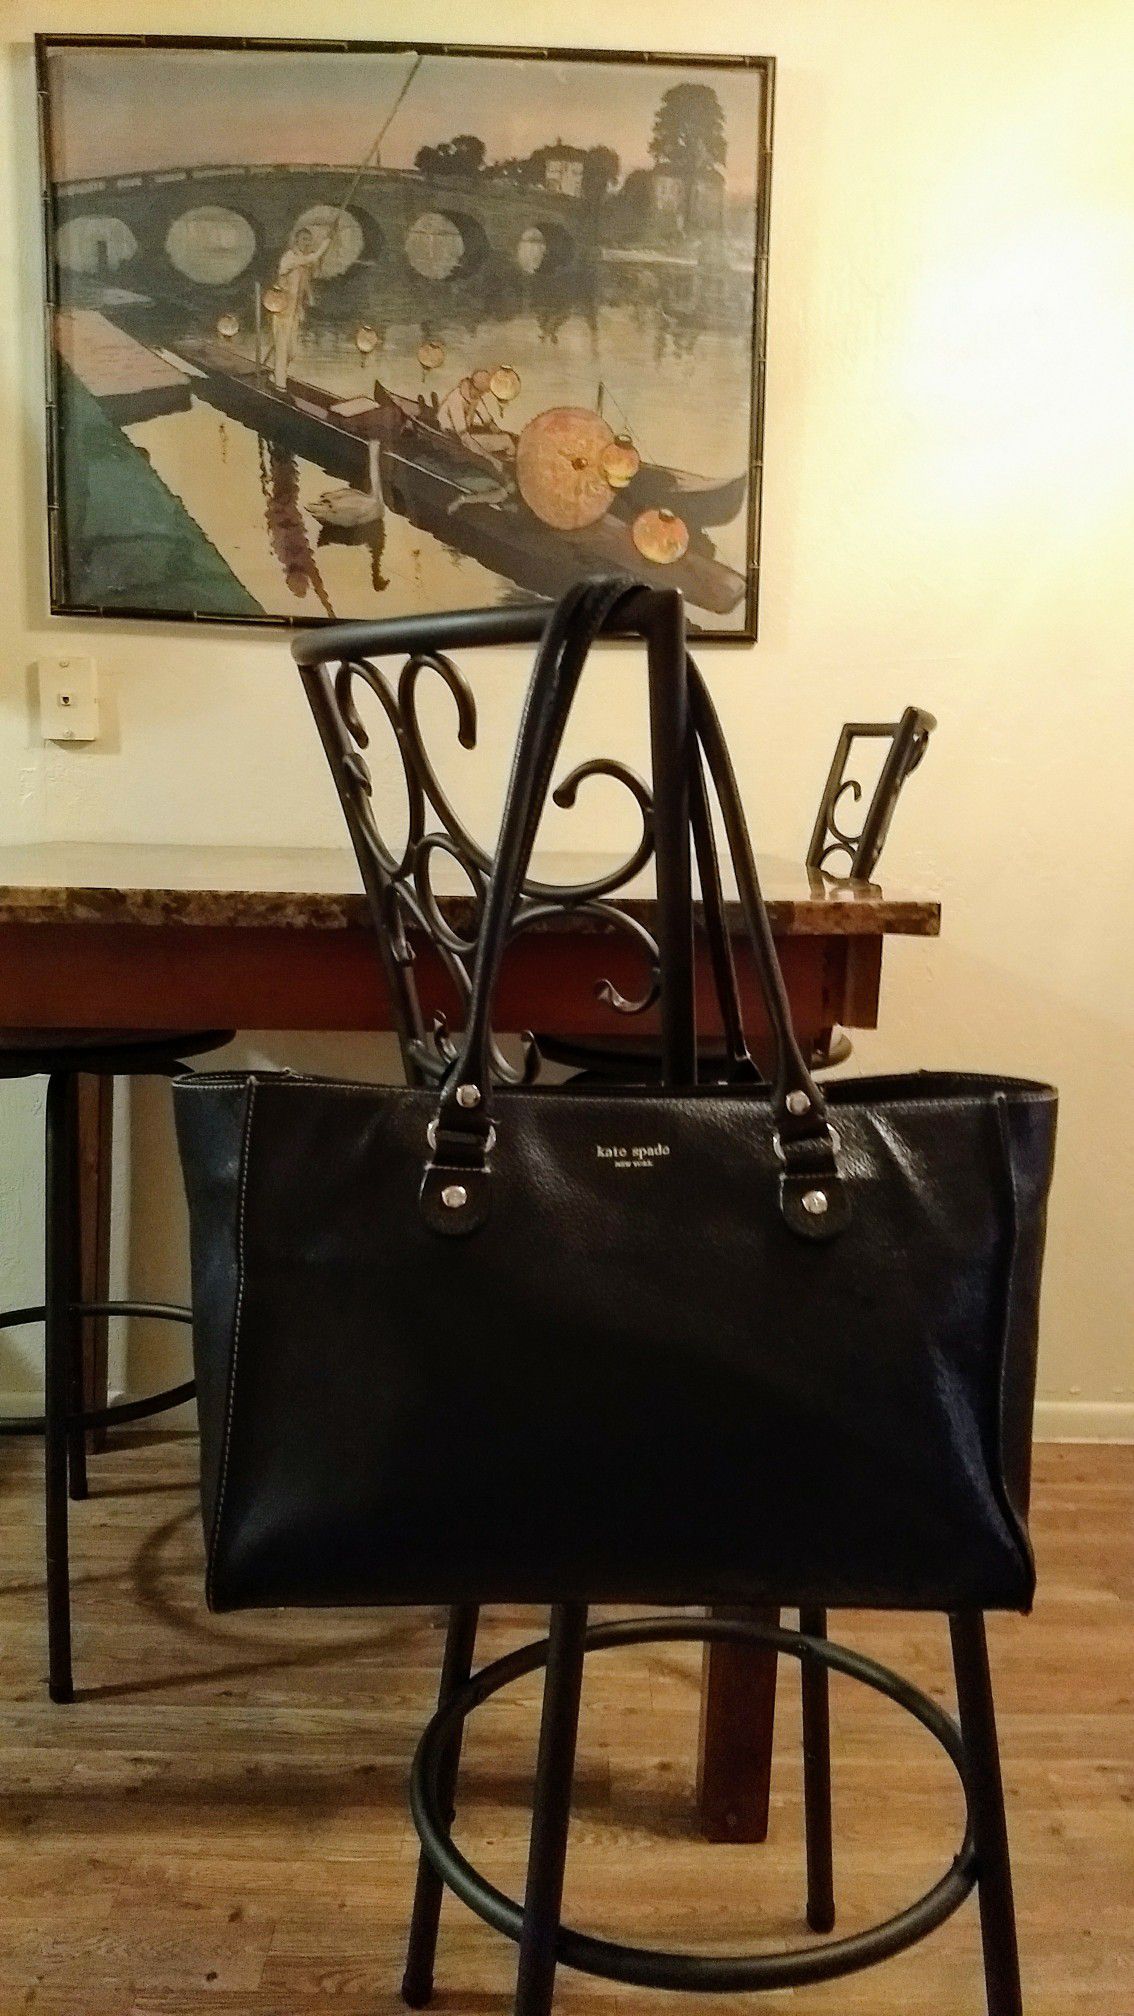 NWT Authentic Kate Spade handbag for Sale in Everett, WA - OfferUp